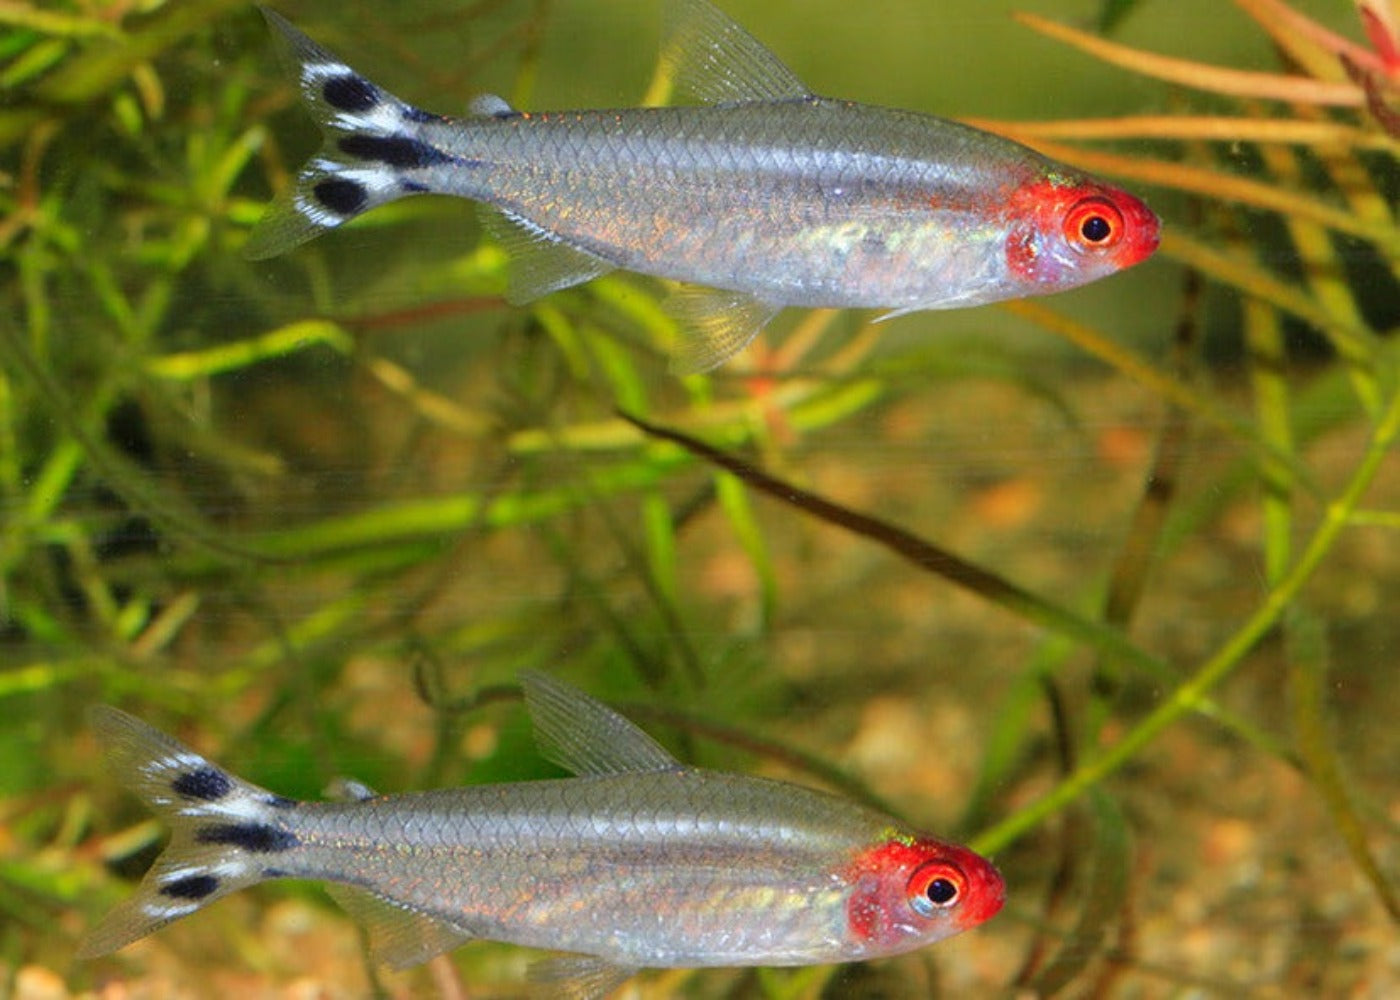 Rummynose Tetra - small light transparent fish with red face and eyes with black spotted tail